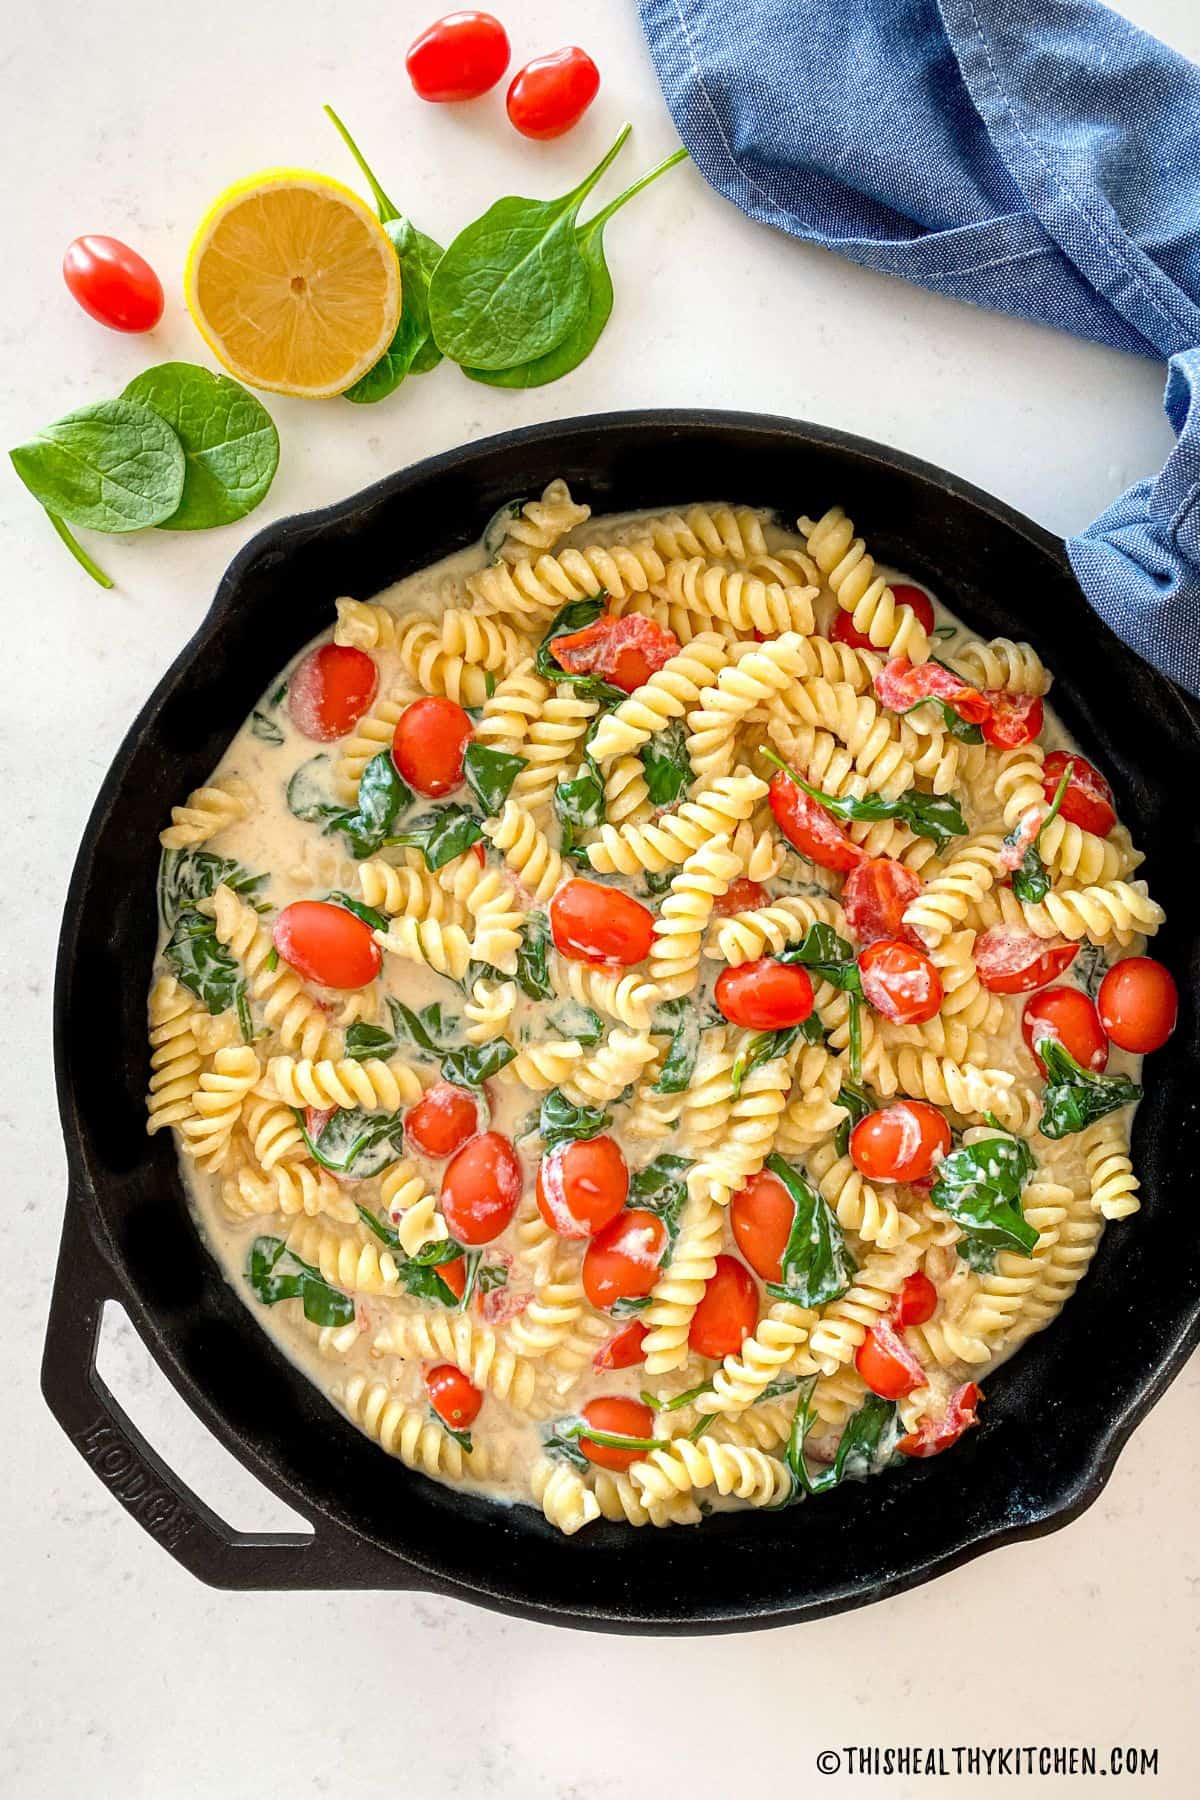 Cast iron pan with rotini pasta, cherry tomatoes and spinach in a white sauce.